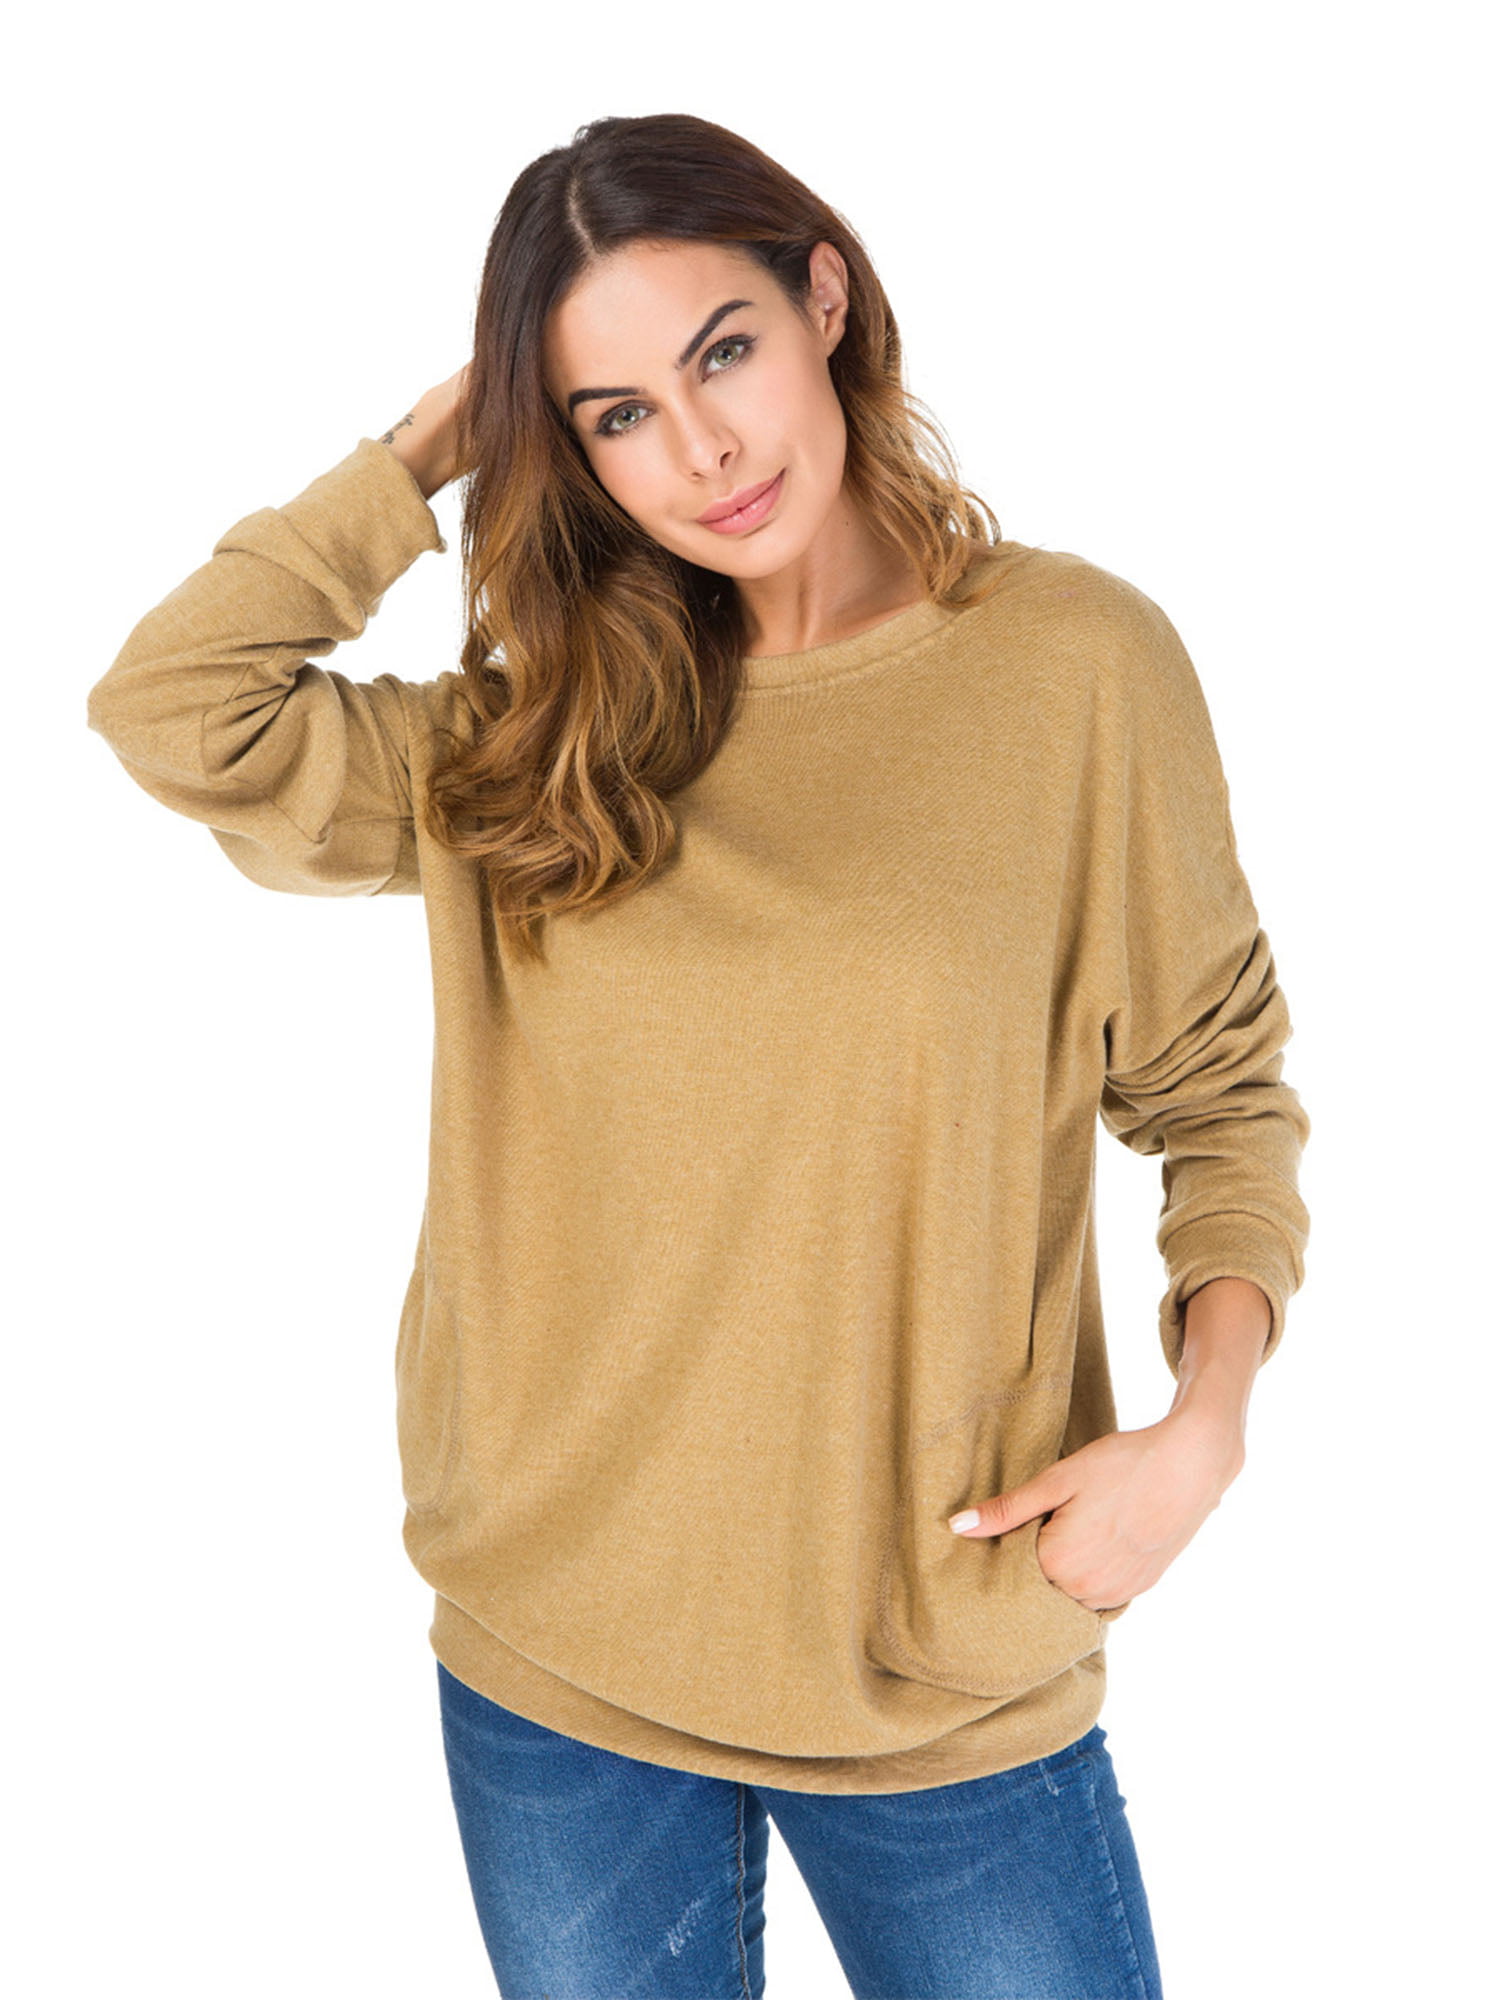 TODOLOR Women Casual Long Sleeve Shirt Crewneck Tunic Top Sweatshirts Blouse with Pockets